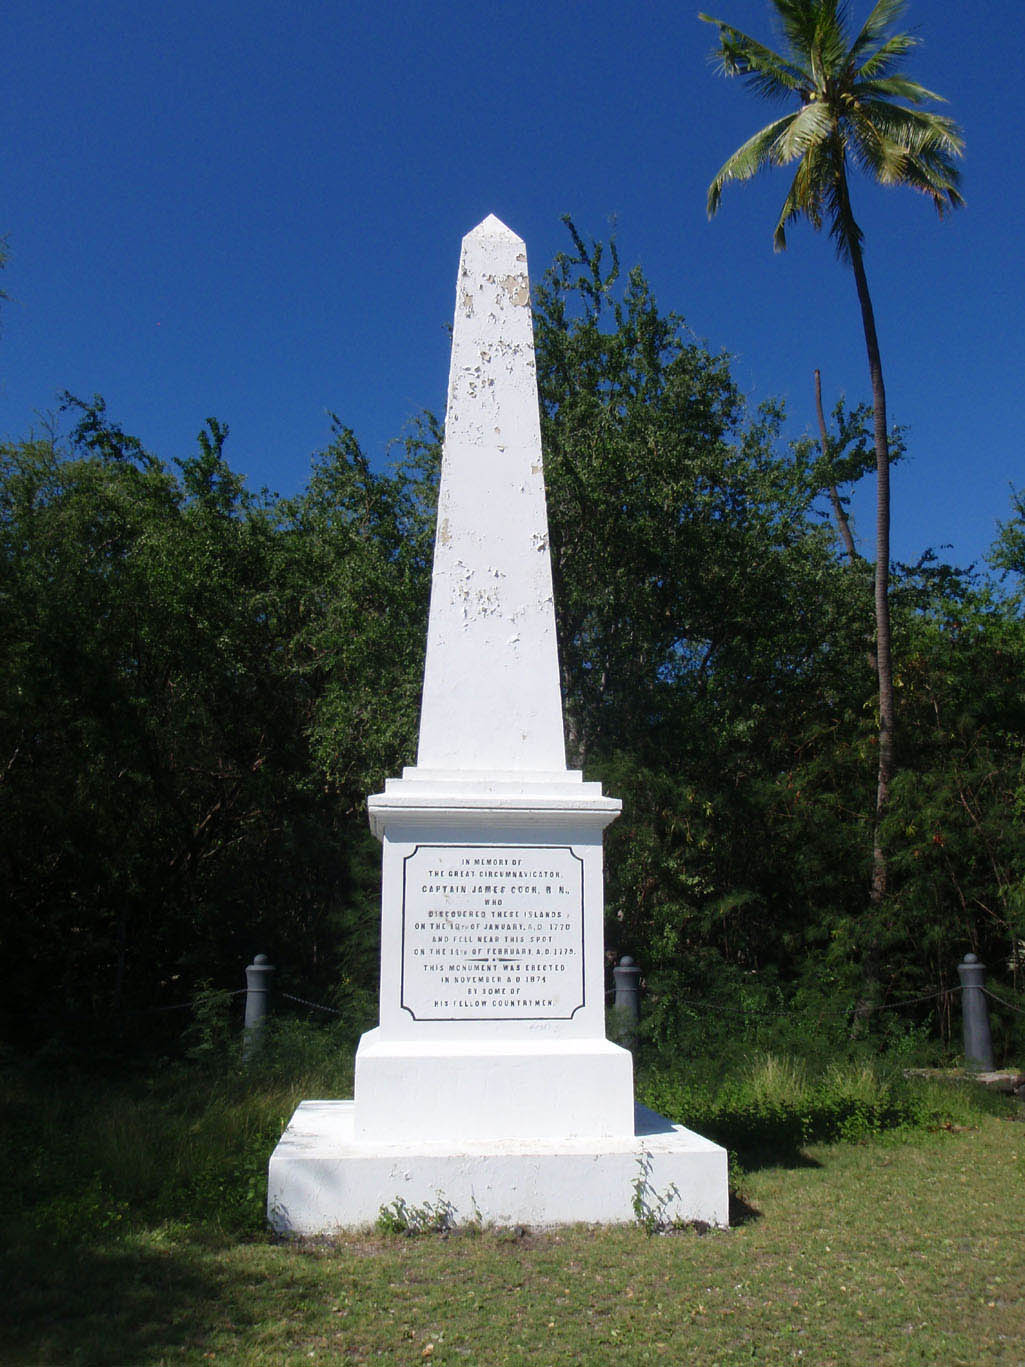 Monument erected at the location of James Cook's death. Photo taken on January 12, 2009.